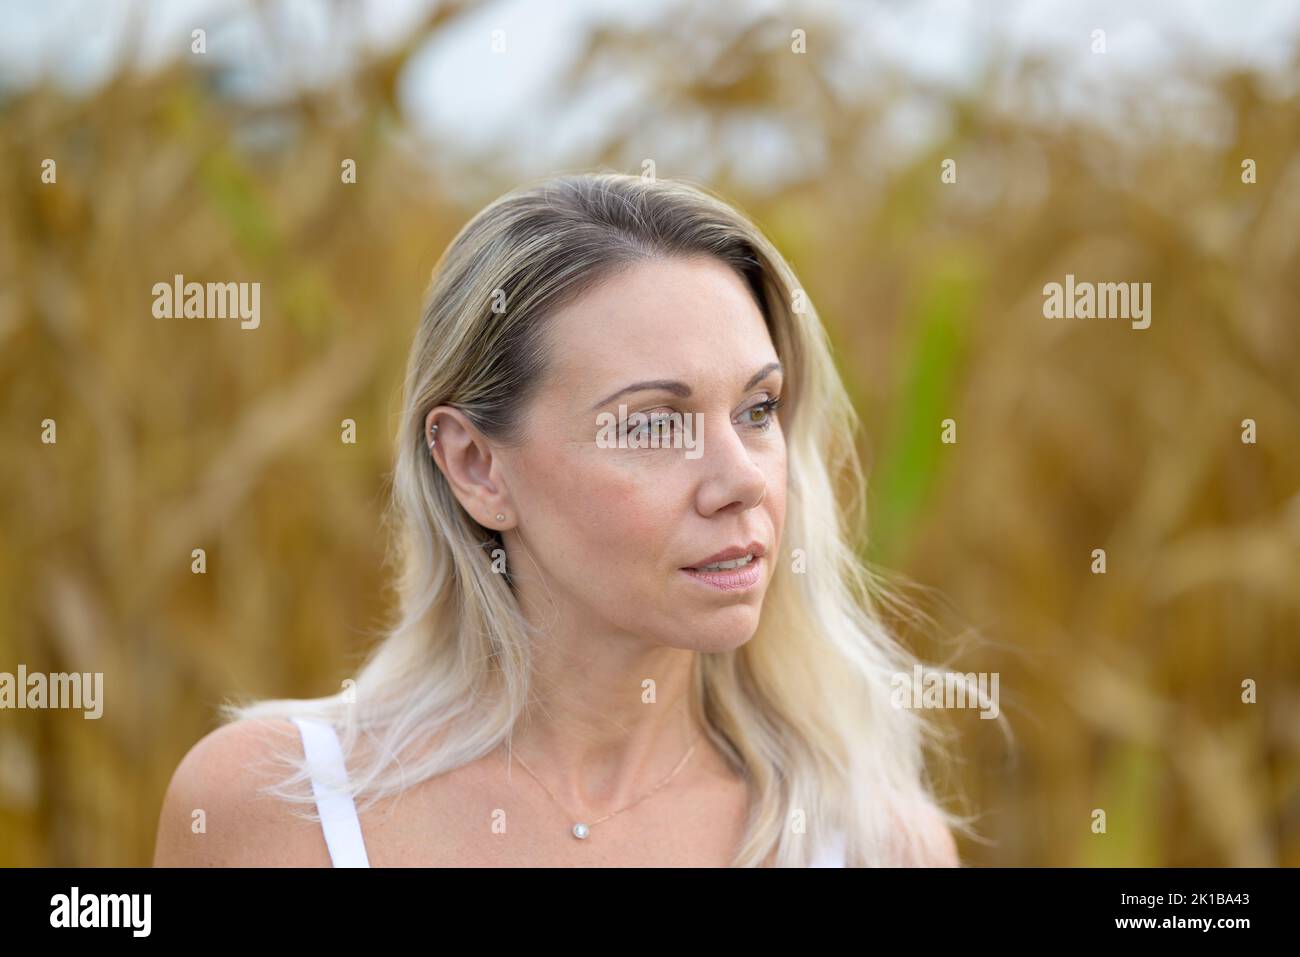 Close up portrait of a beautiful attractive blond woman wearing a white top is standing in the middle of a corn field looking aside Stock Photo